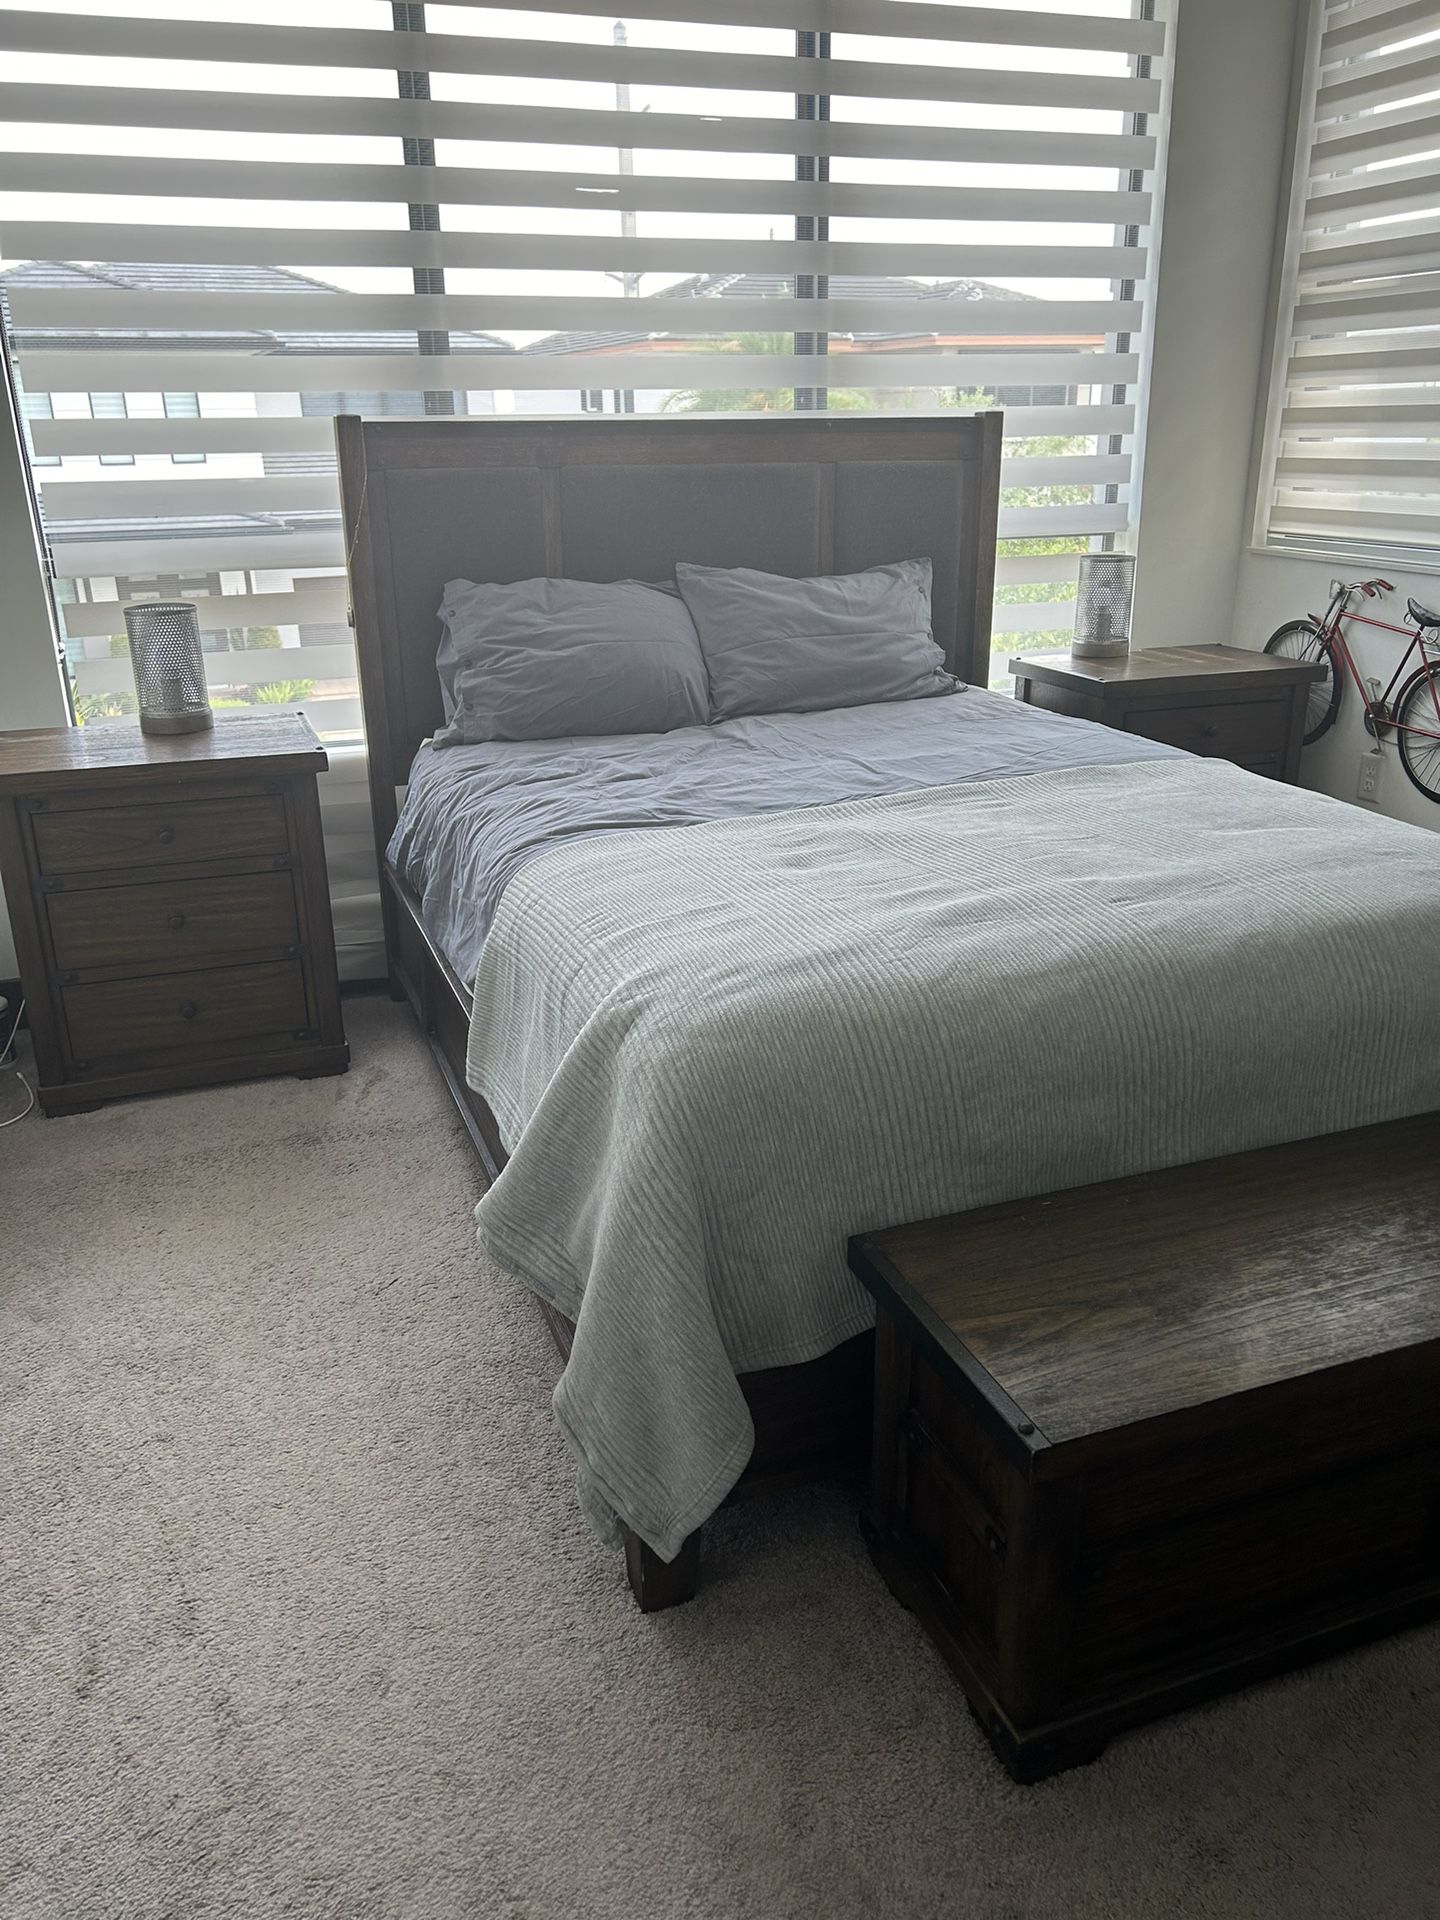  Queen Bedroom Set And Brand New King Size Sheets